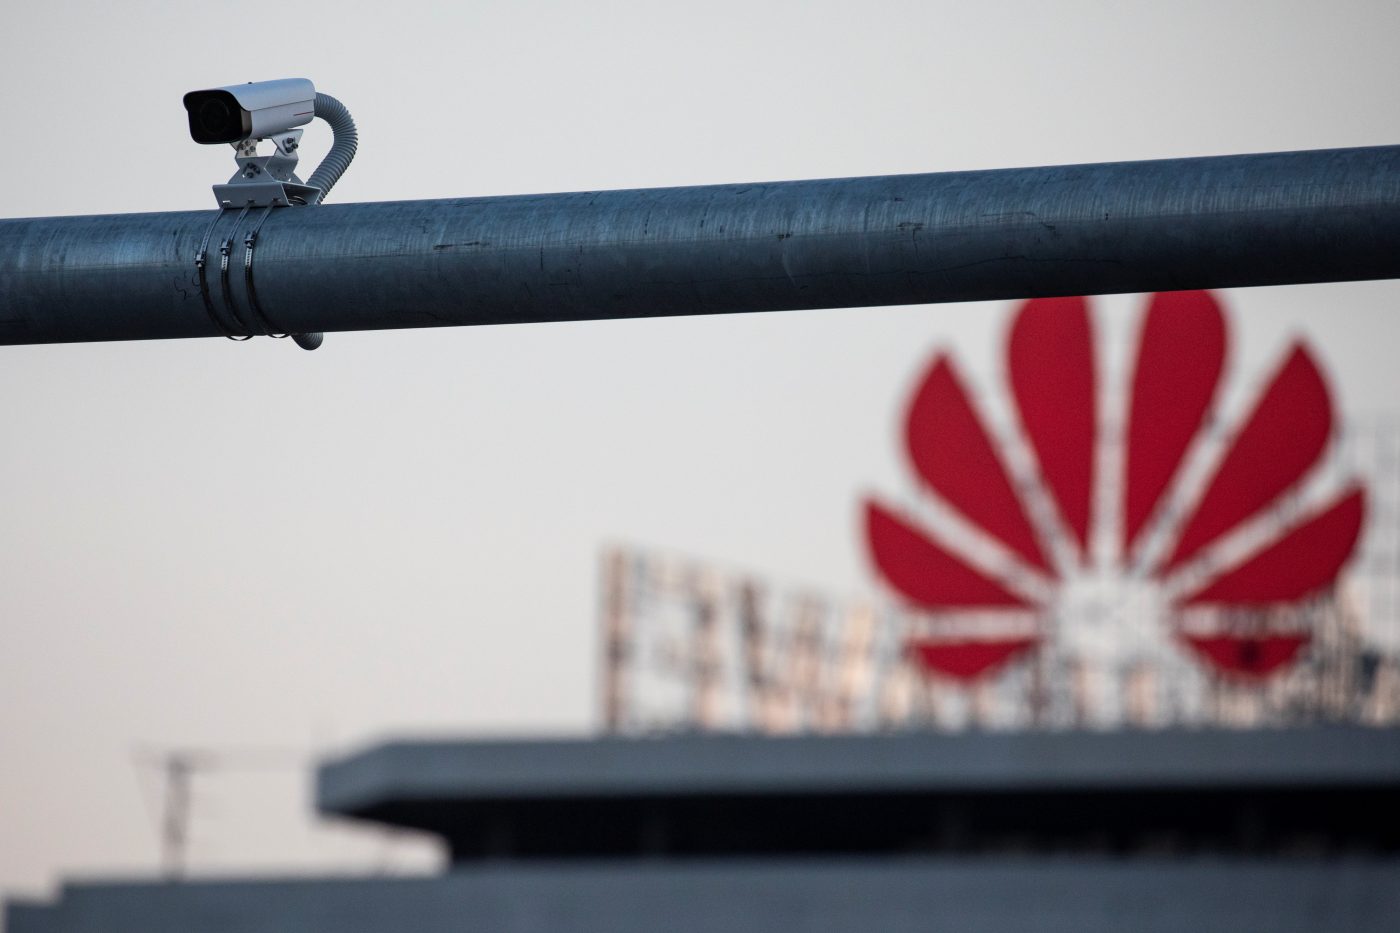 Photo: A surveillance camera is seen in front of a Huawei logo in Belgrade, Serbia, August 11, 2020. Picture taken August 11, 2020. Credit: REUTERS/Marko Djurica